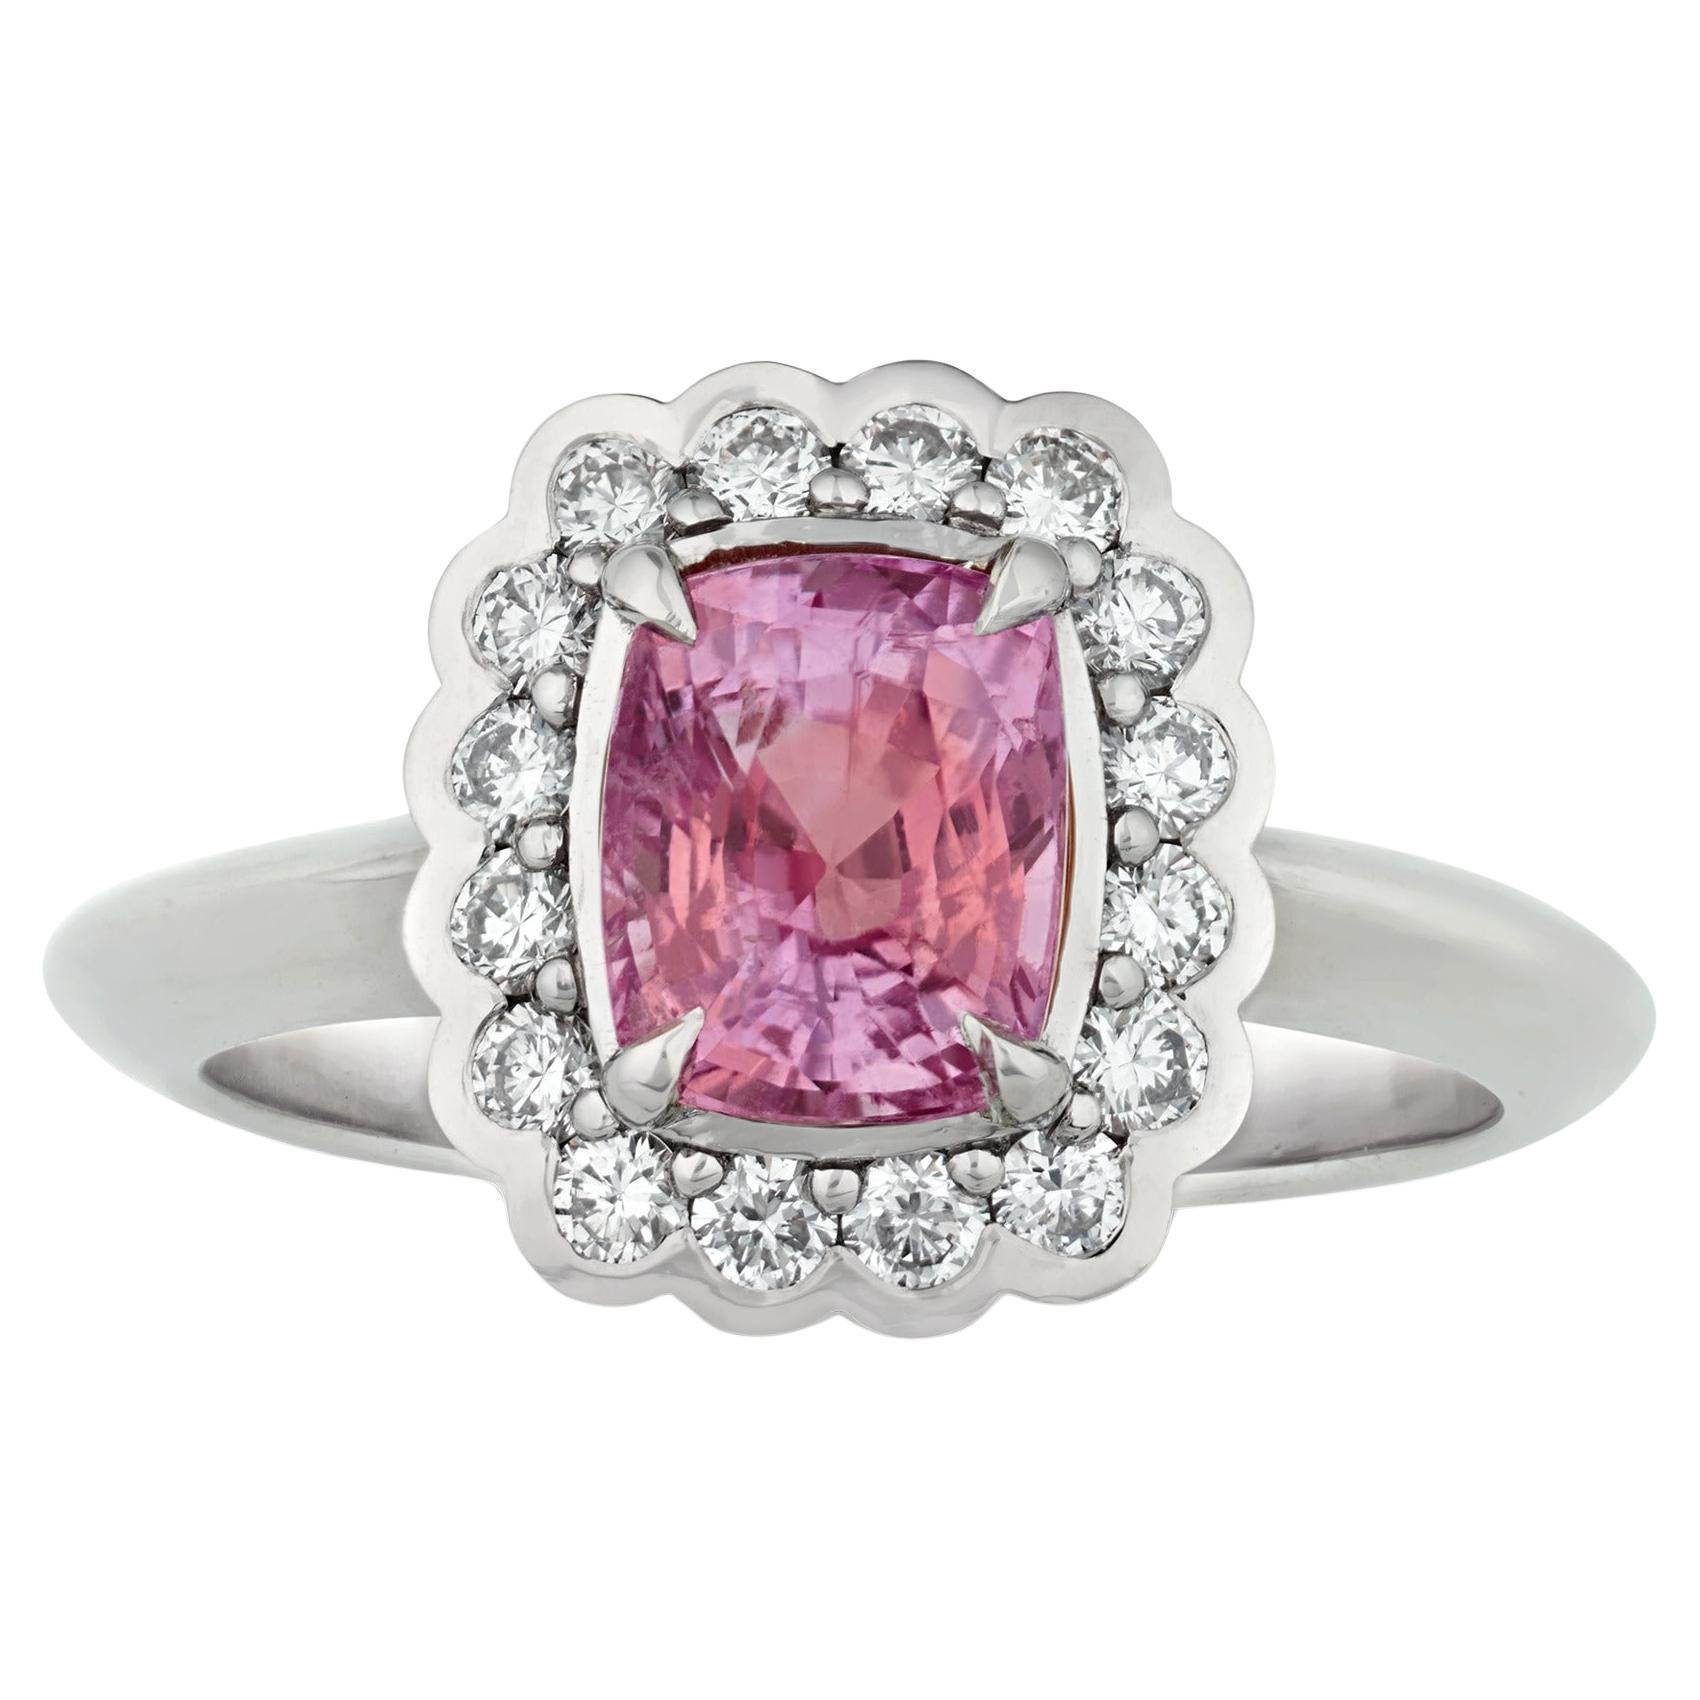 Padparadscha Sapphire Ring, 2.04 Carats For Sale